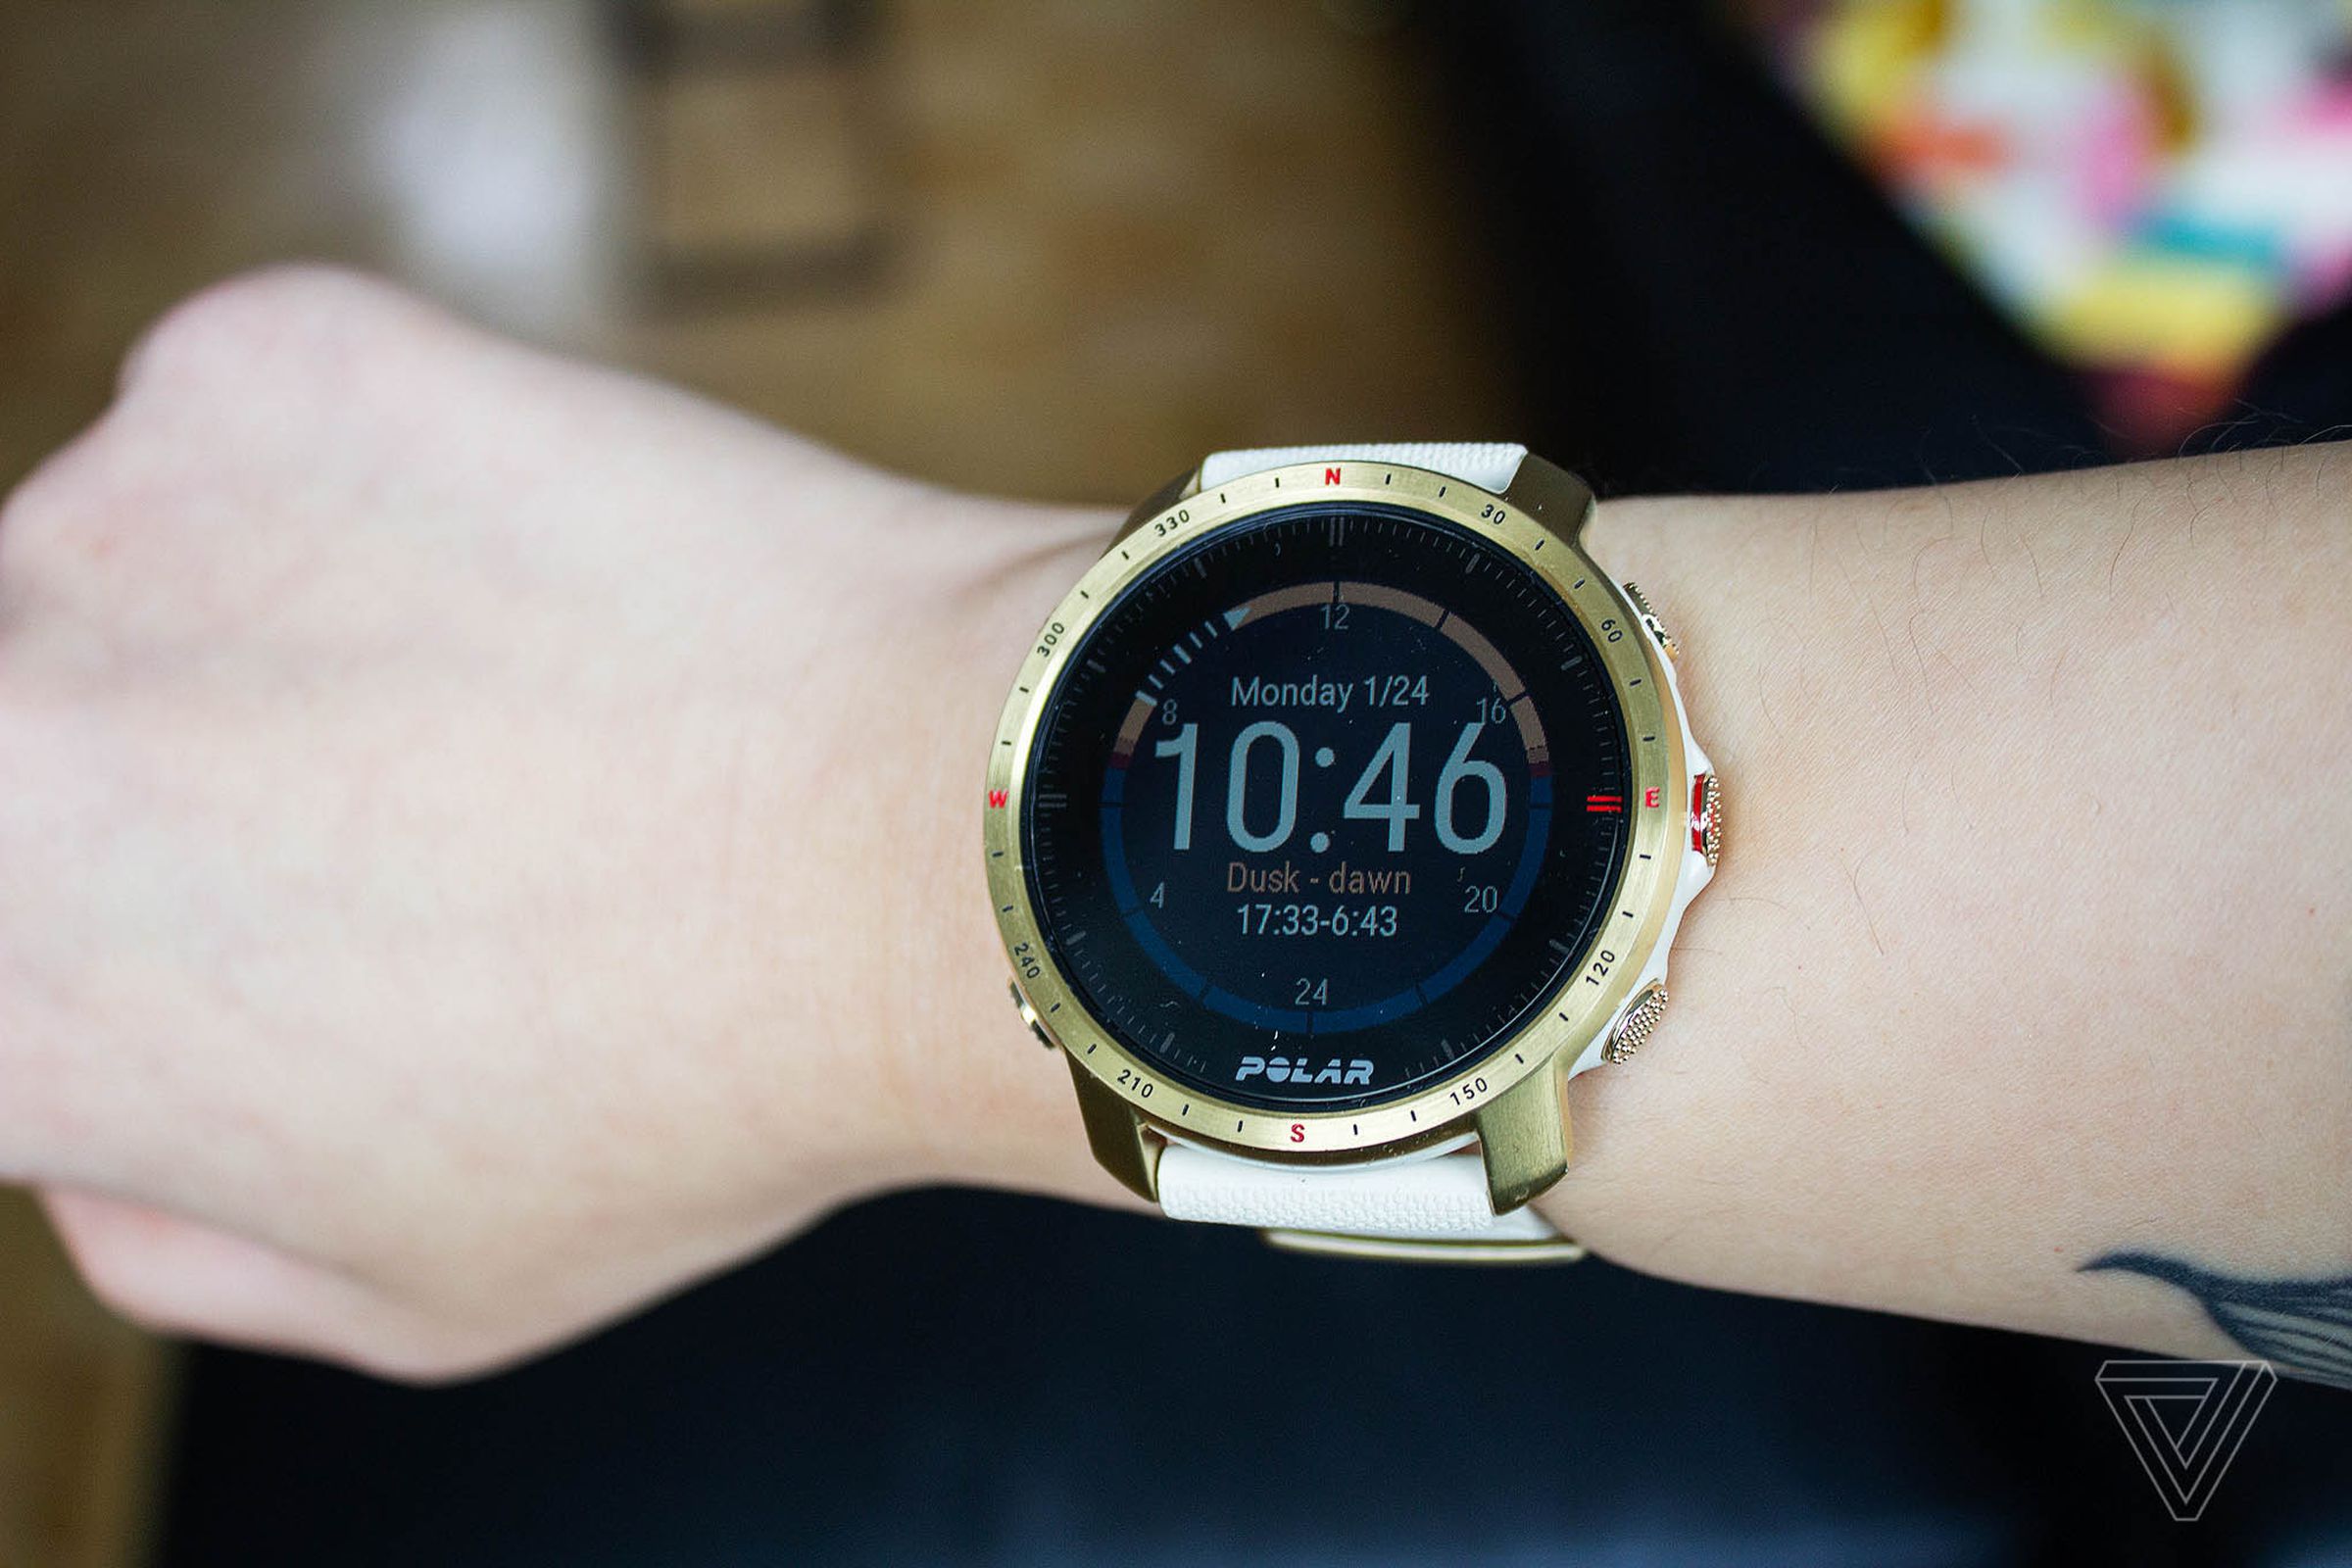 It’s big, but not hideous to look at. This is also what the Dusk / Dawn watch face looks like in moderate sunlight with the backlight on low.